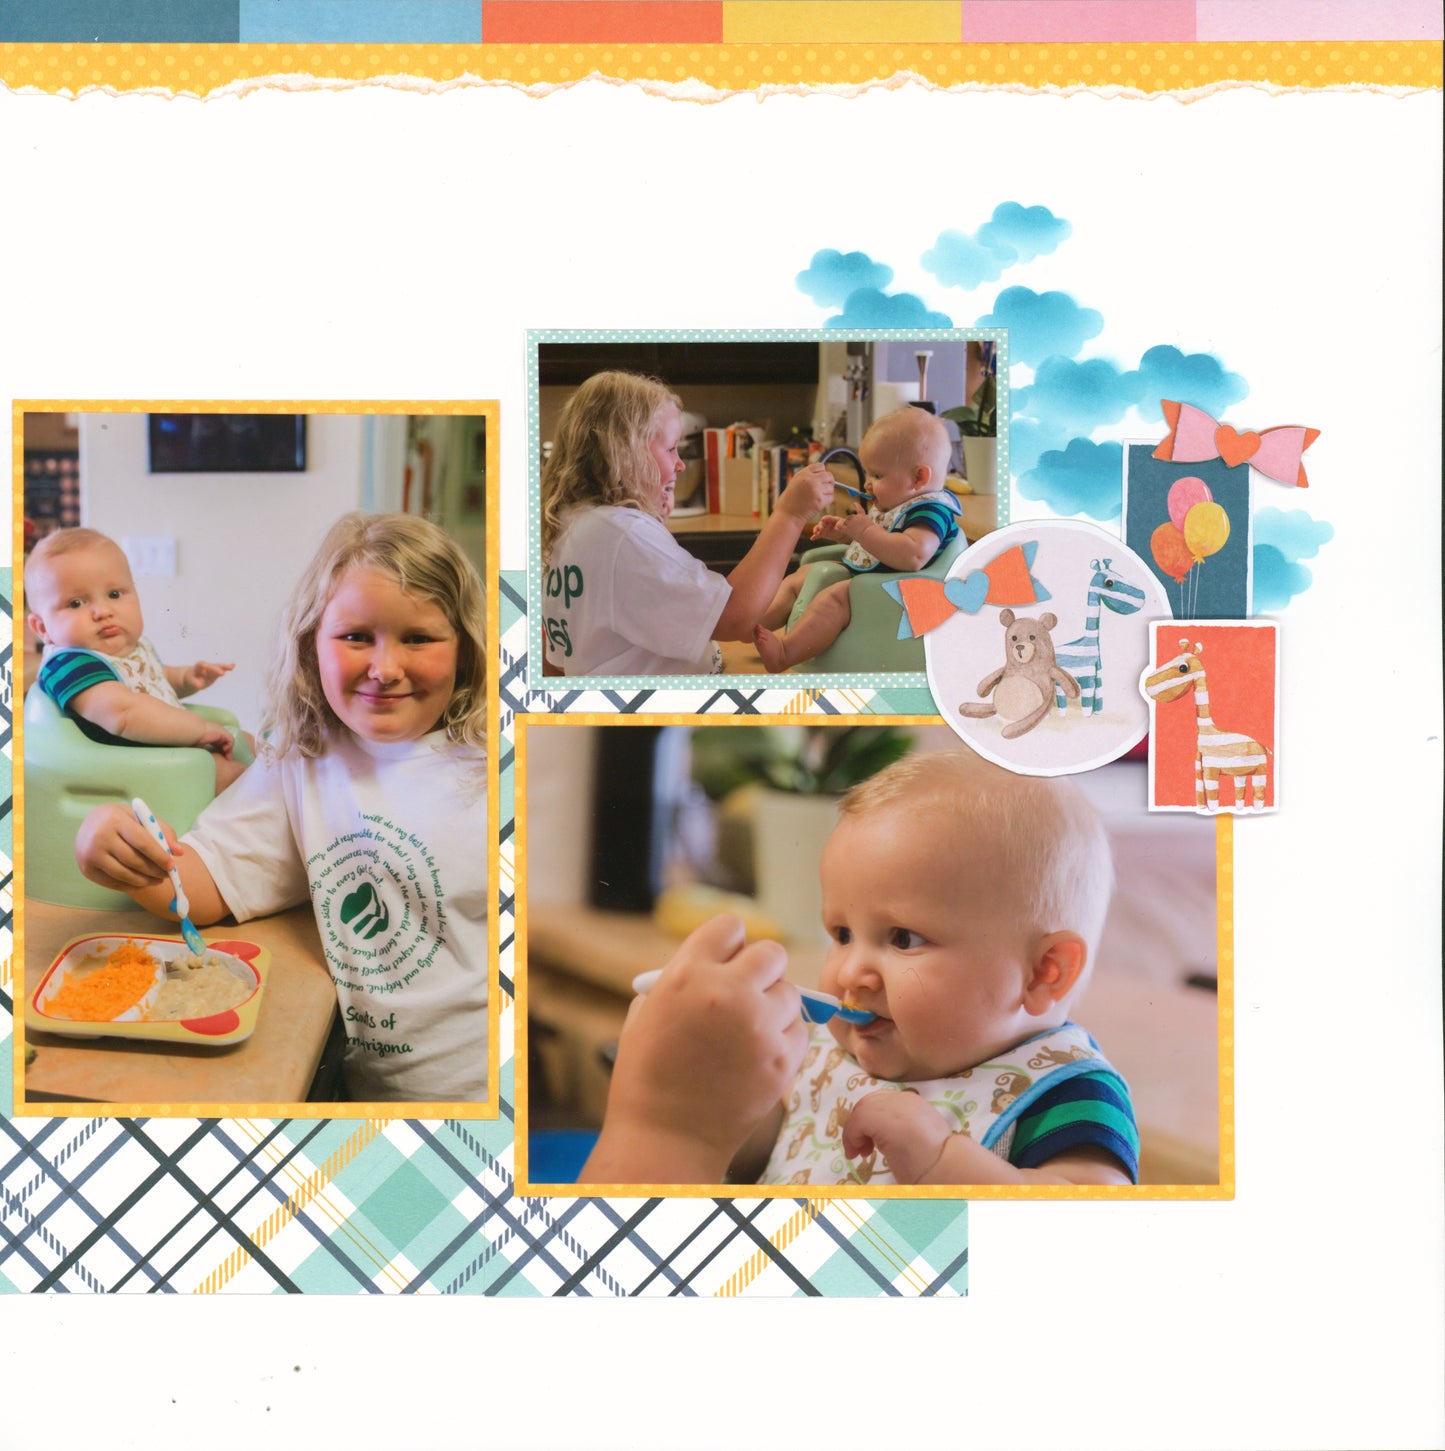 "Little One" Page Kit by Meridy Twilling